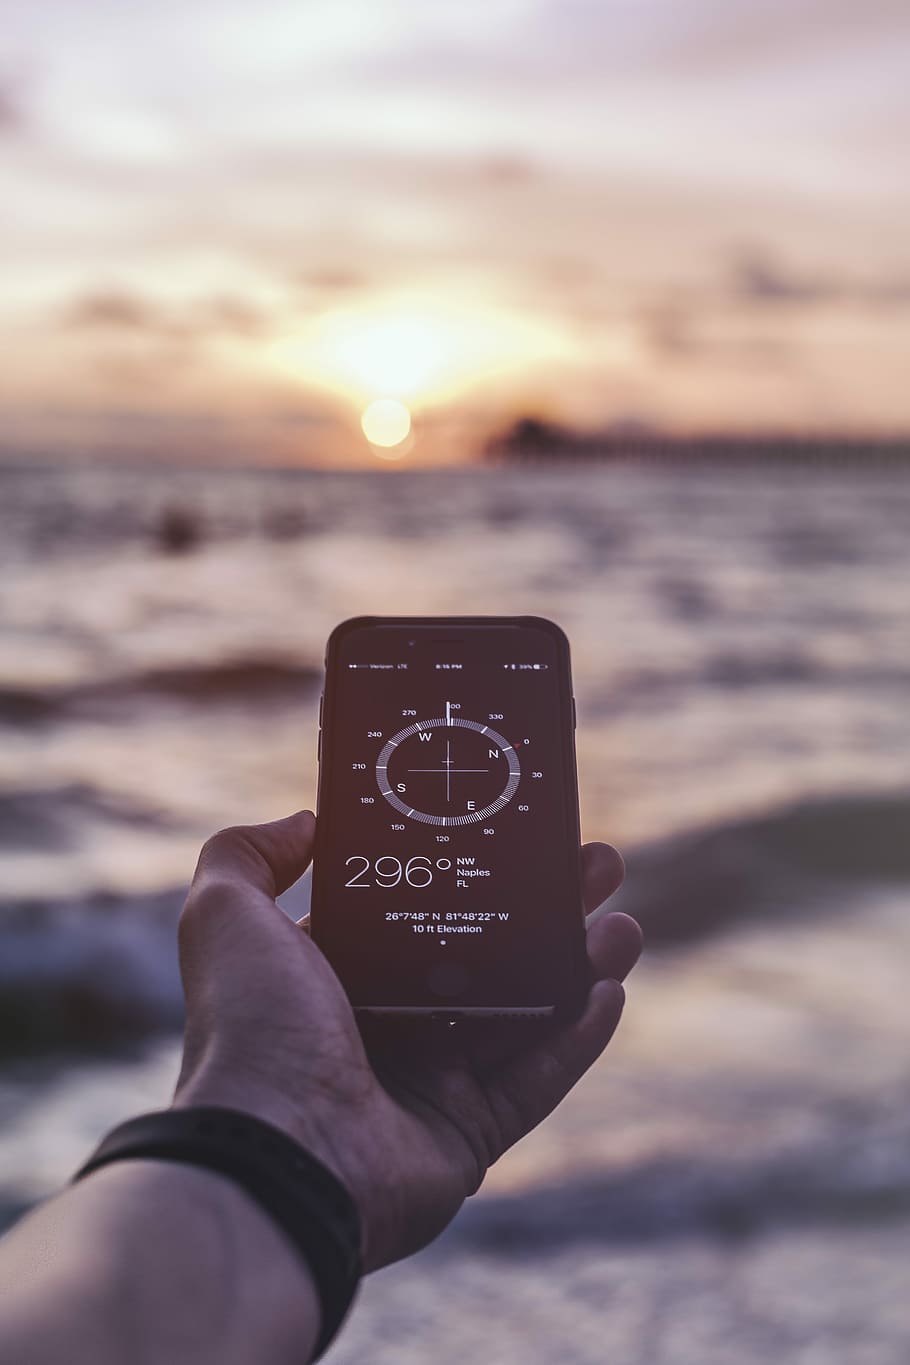 HD wallpaper: person holding smartphone reading at 296, iPhone compass  showing 296 NW | Wallpaper Flare